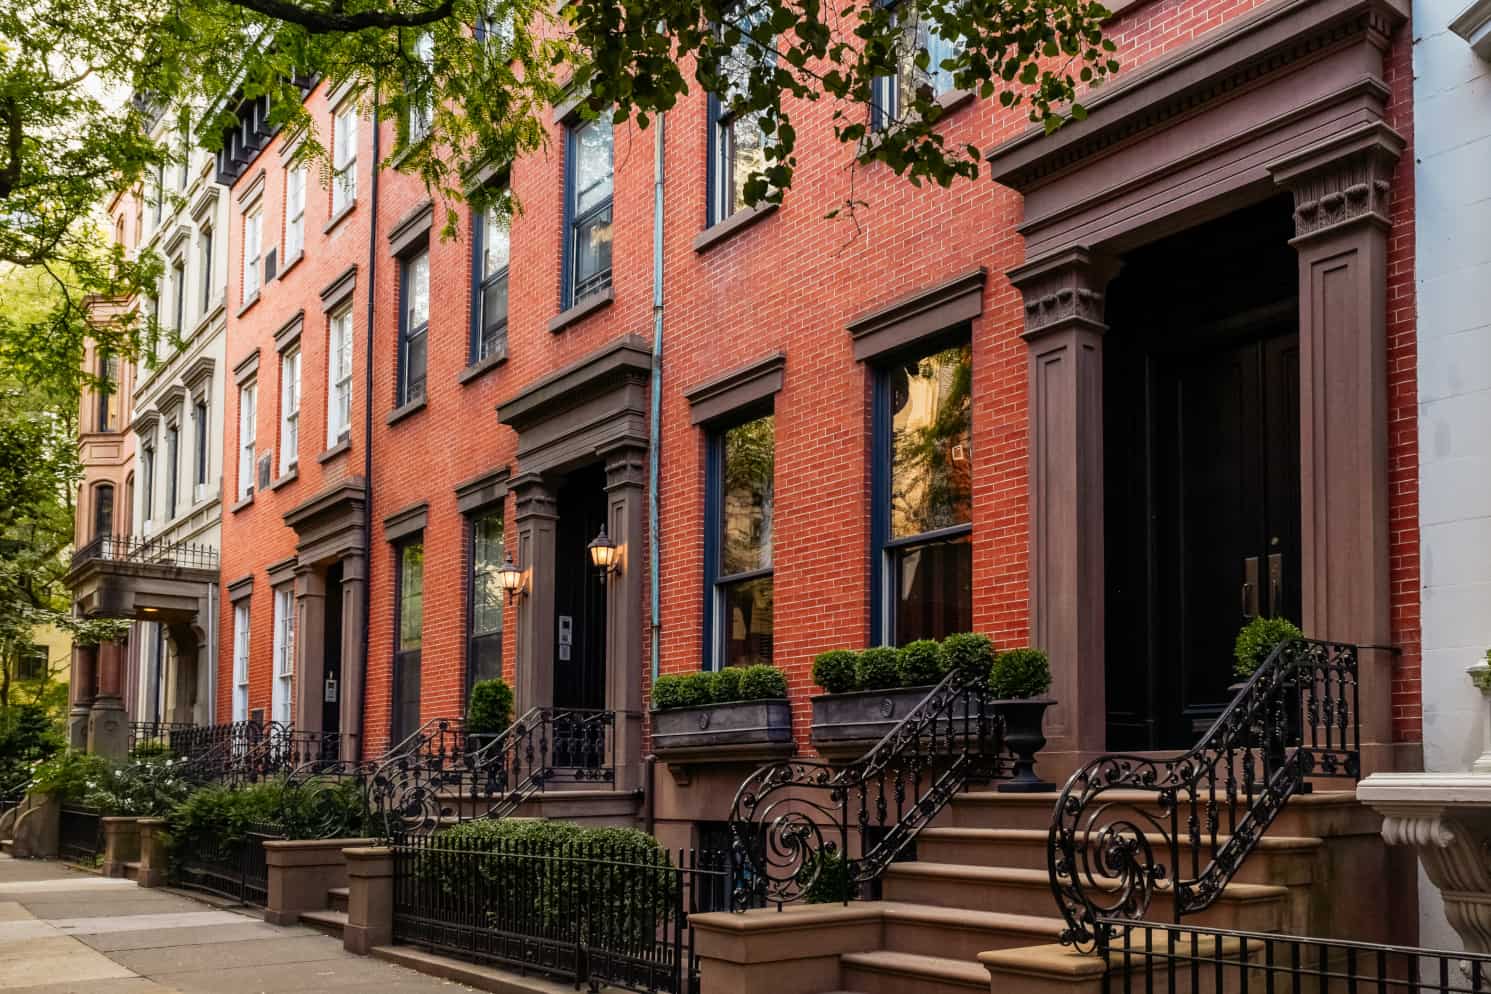 Typical brownstone apartment buildings in the iconic Brooklyn Heights neighborhood in New York City